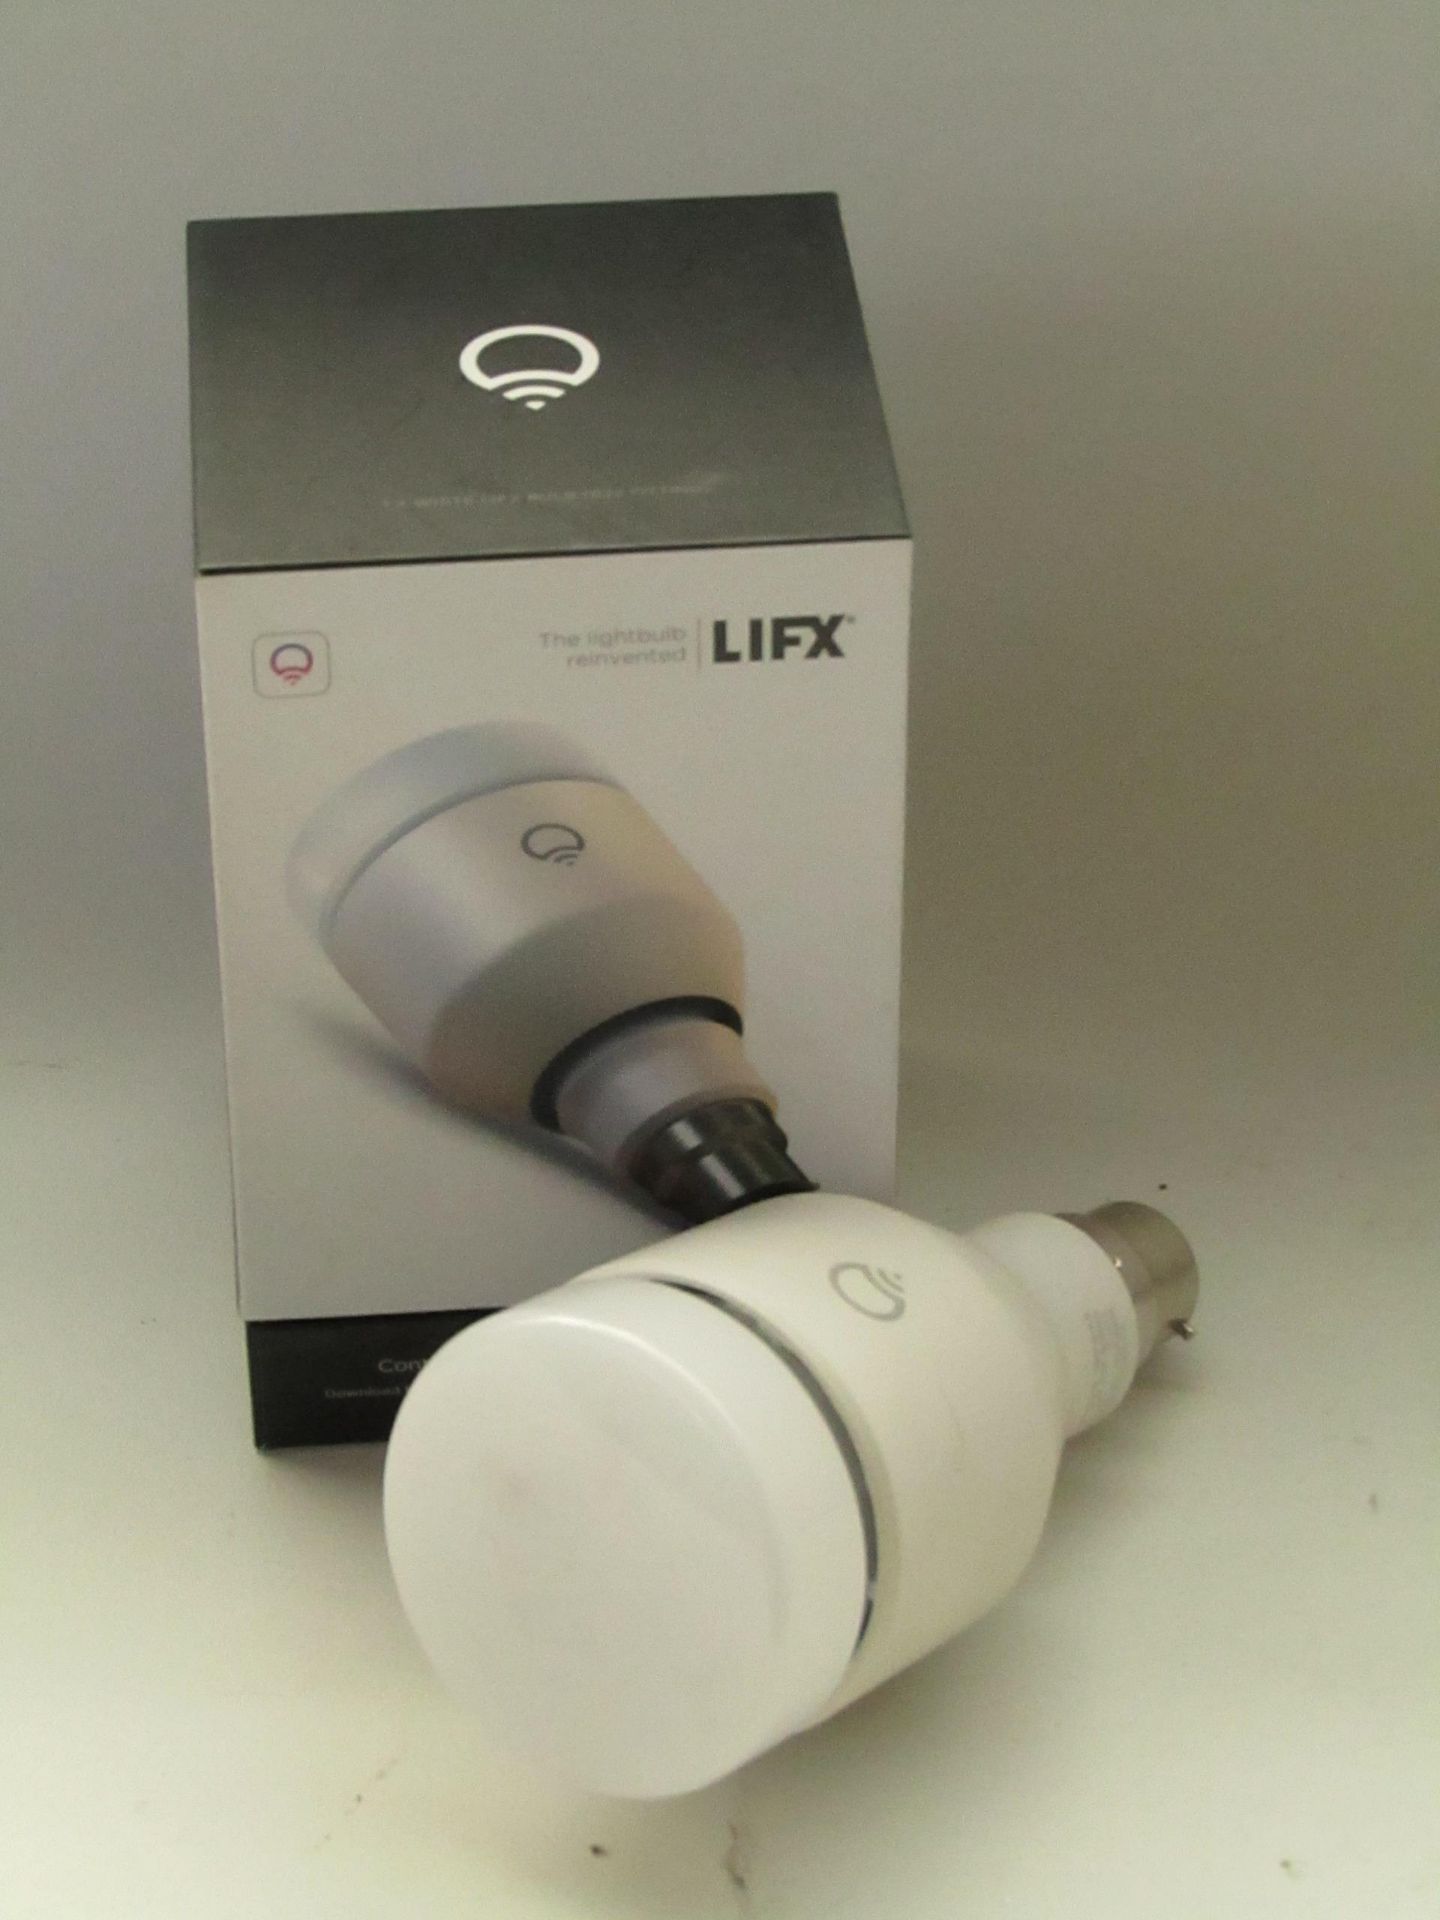 Lifx Large Bayonet smart colour changing light bulb, unchecked in original packaging, RRP £59.99